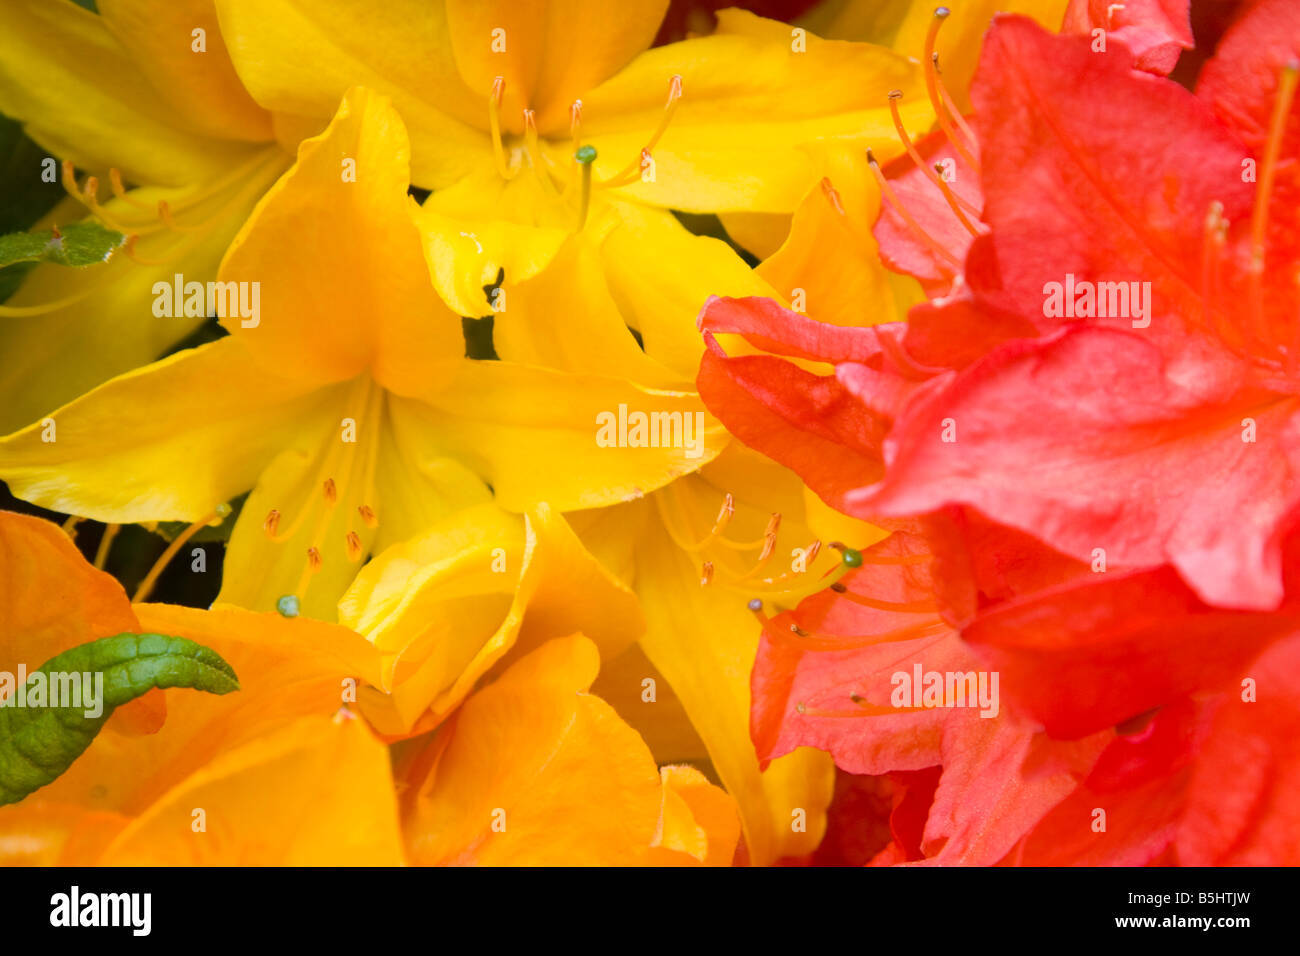 Red and Yellow rhodidendrum flowers Stock Photo